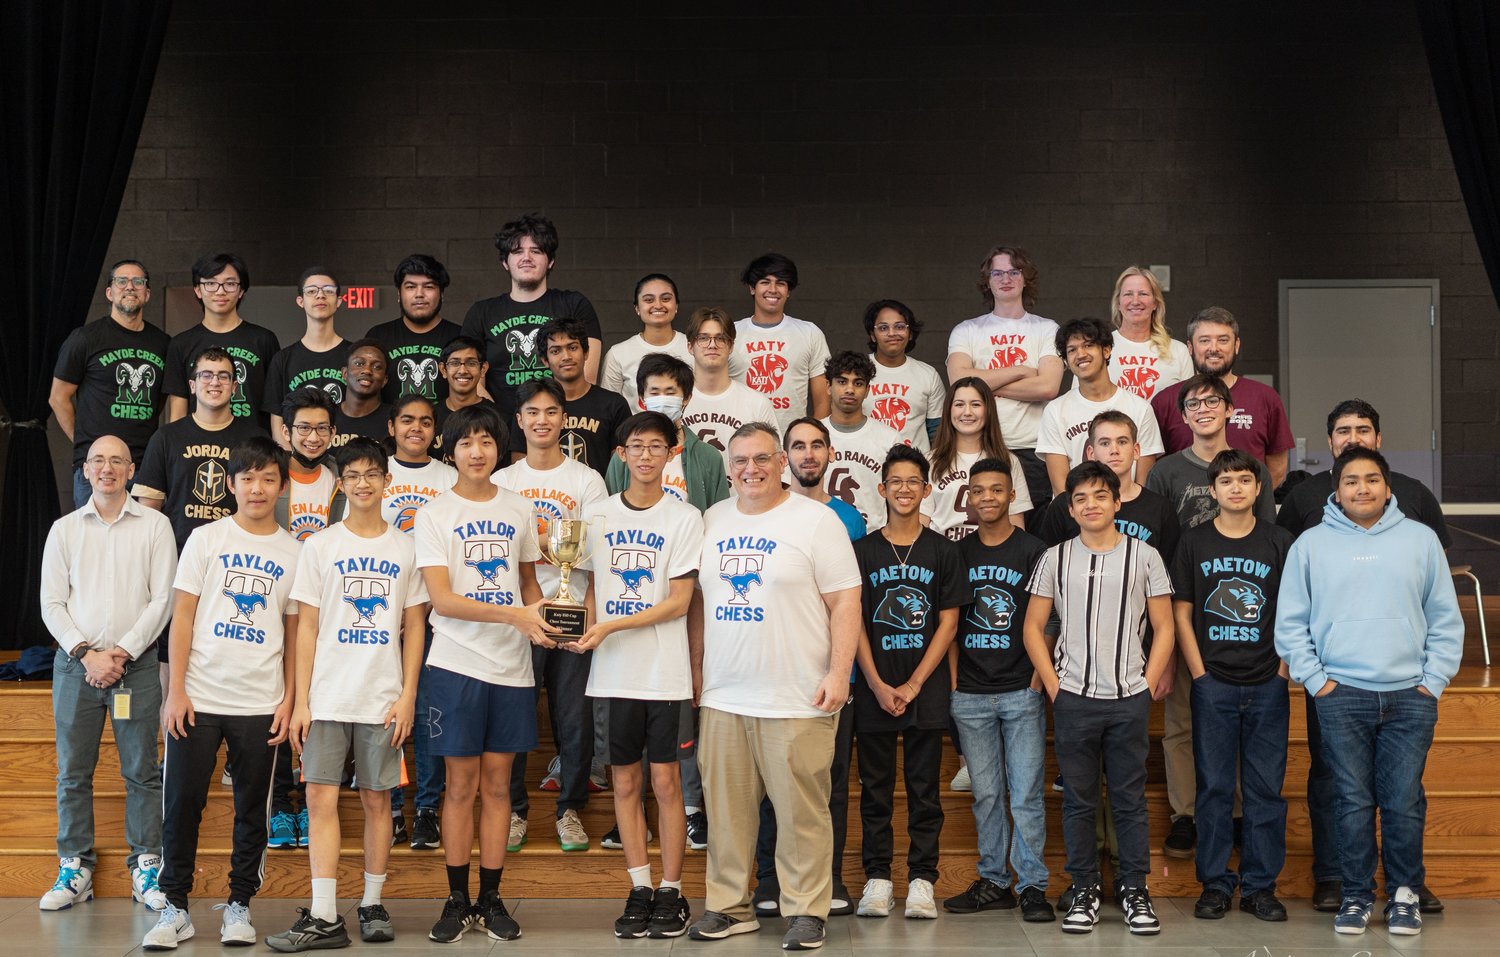 Chess teams from Cinco Ranch, Jordan, Katy, Mayde Creek, Paetow, Seven Lakes and Taylor high schools participated in the first Katy ISD chess tournament, held Feb. 25 at Paetow High. (Adriana Campero)